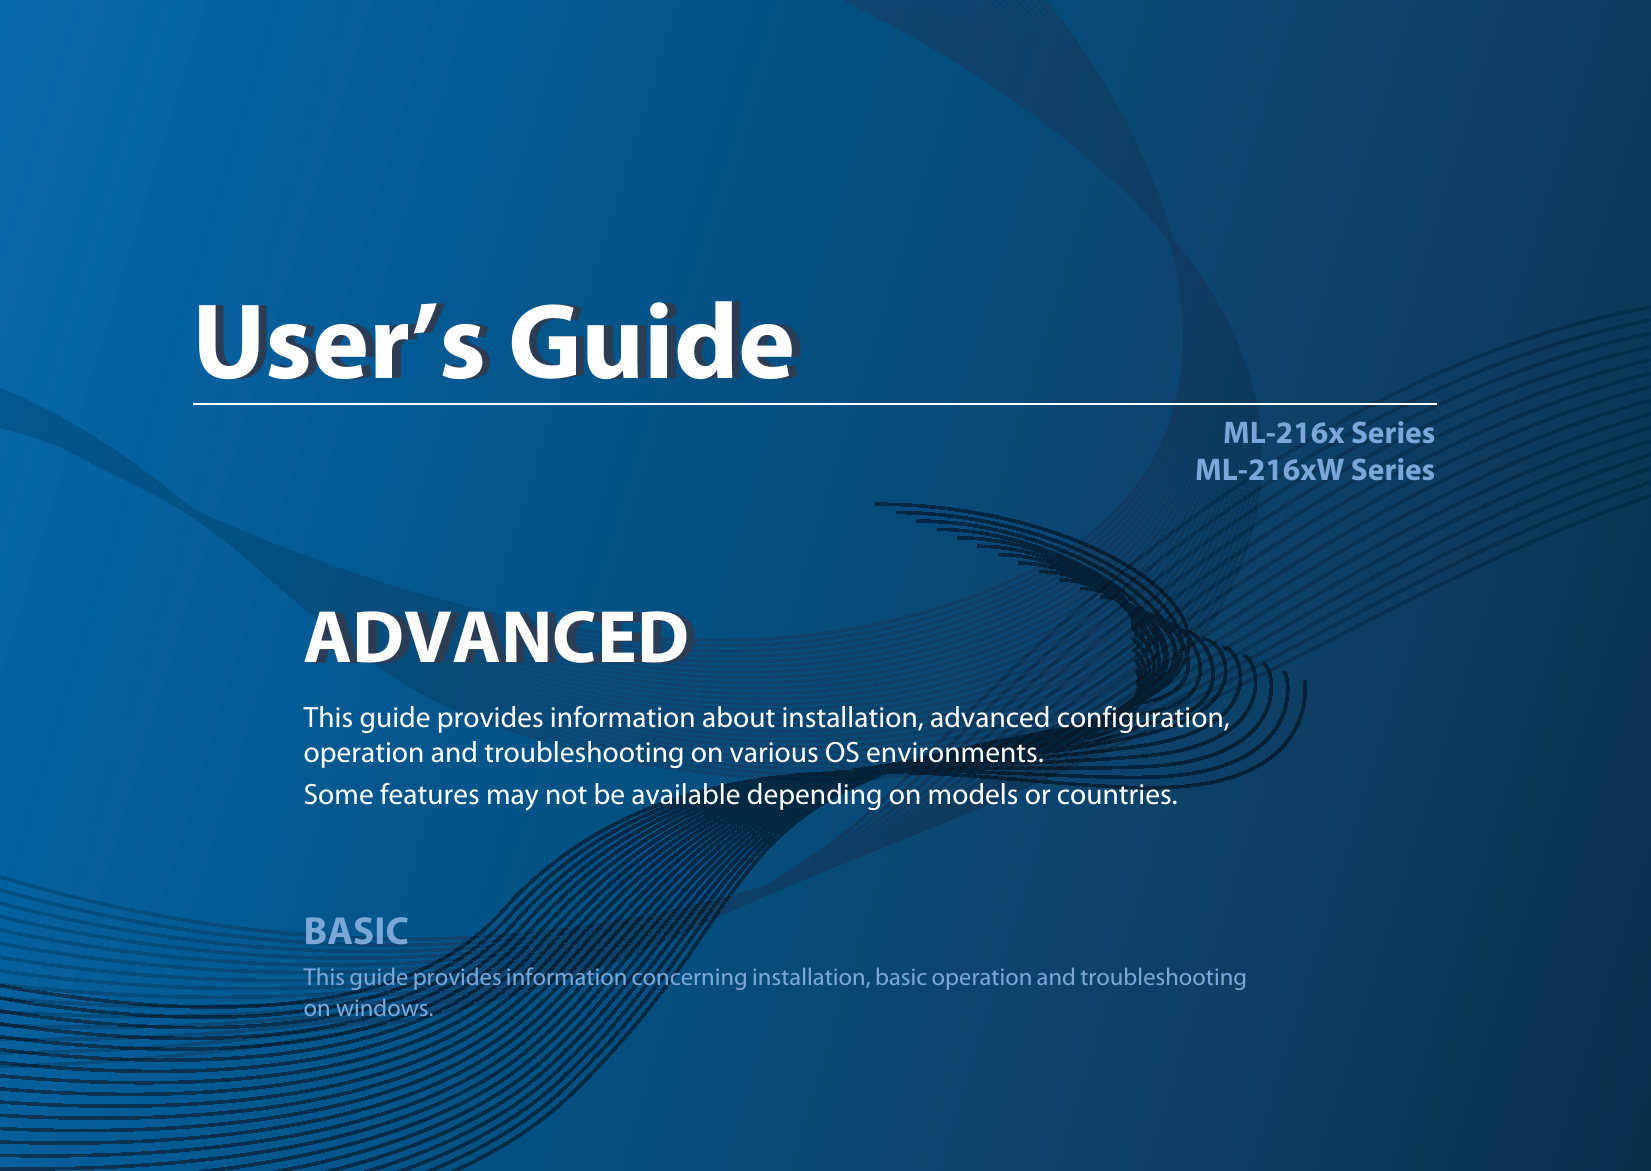 ADVANCEDUser’s GuideML-216x SeriesML-216xW SeriesADVANCEDUser’s GuideThis guide provides information about installation, advanced configuration, operation and troubleshooting on various OS environments. Some features may not be available depending on models or countries.BASICThis guide provides information concerning installation, basic operation and troubleshooting on windows.